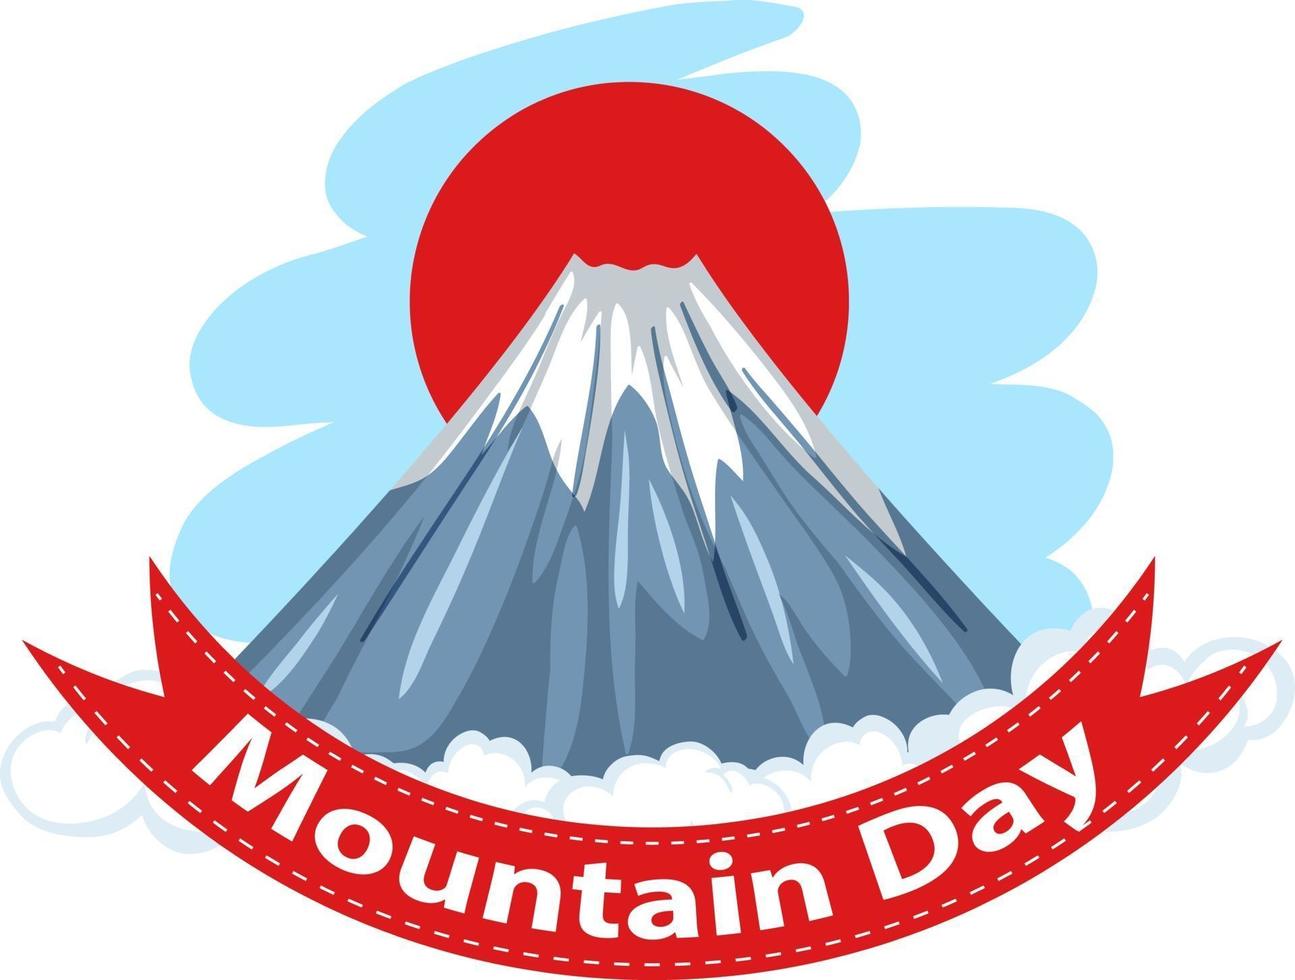 Mount Fuji and Red Sun with Mountain Day font banner vector